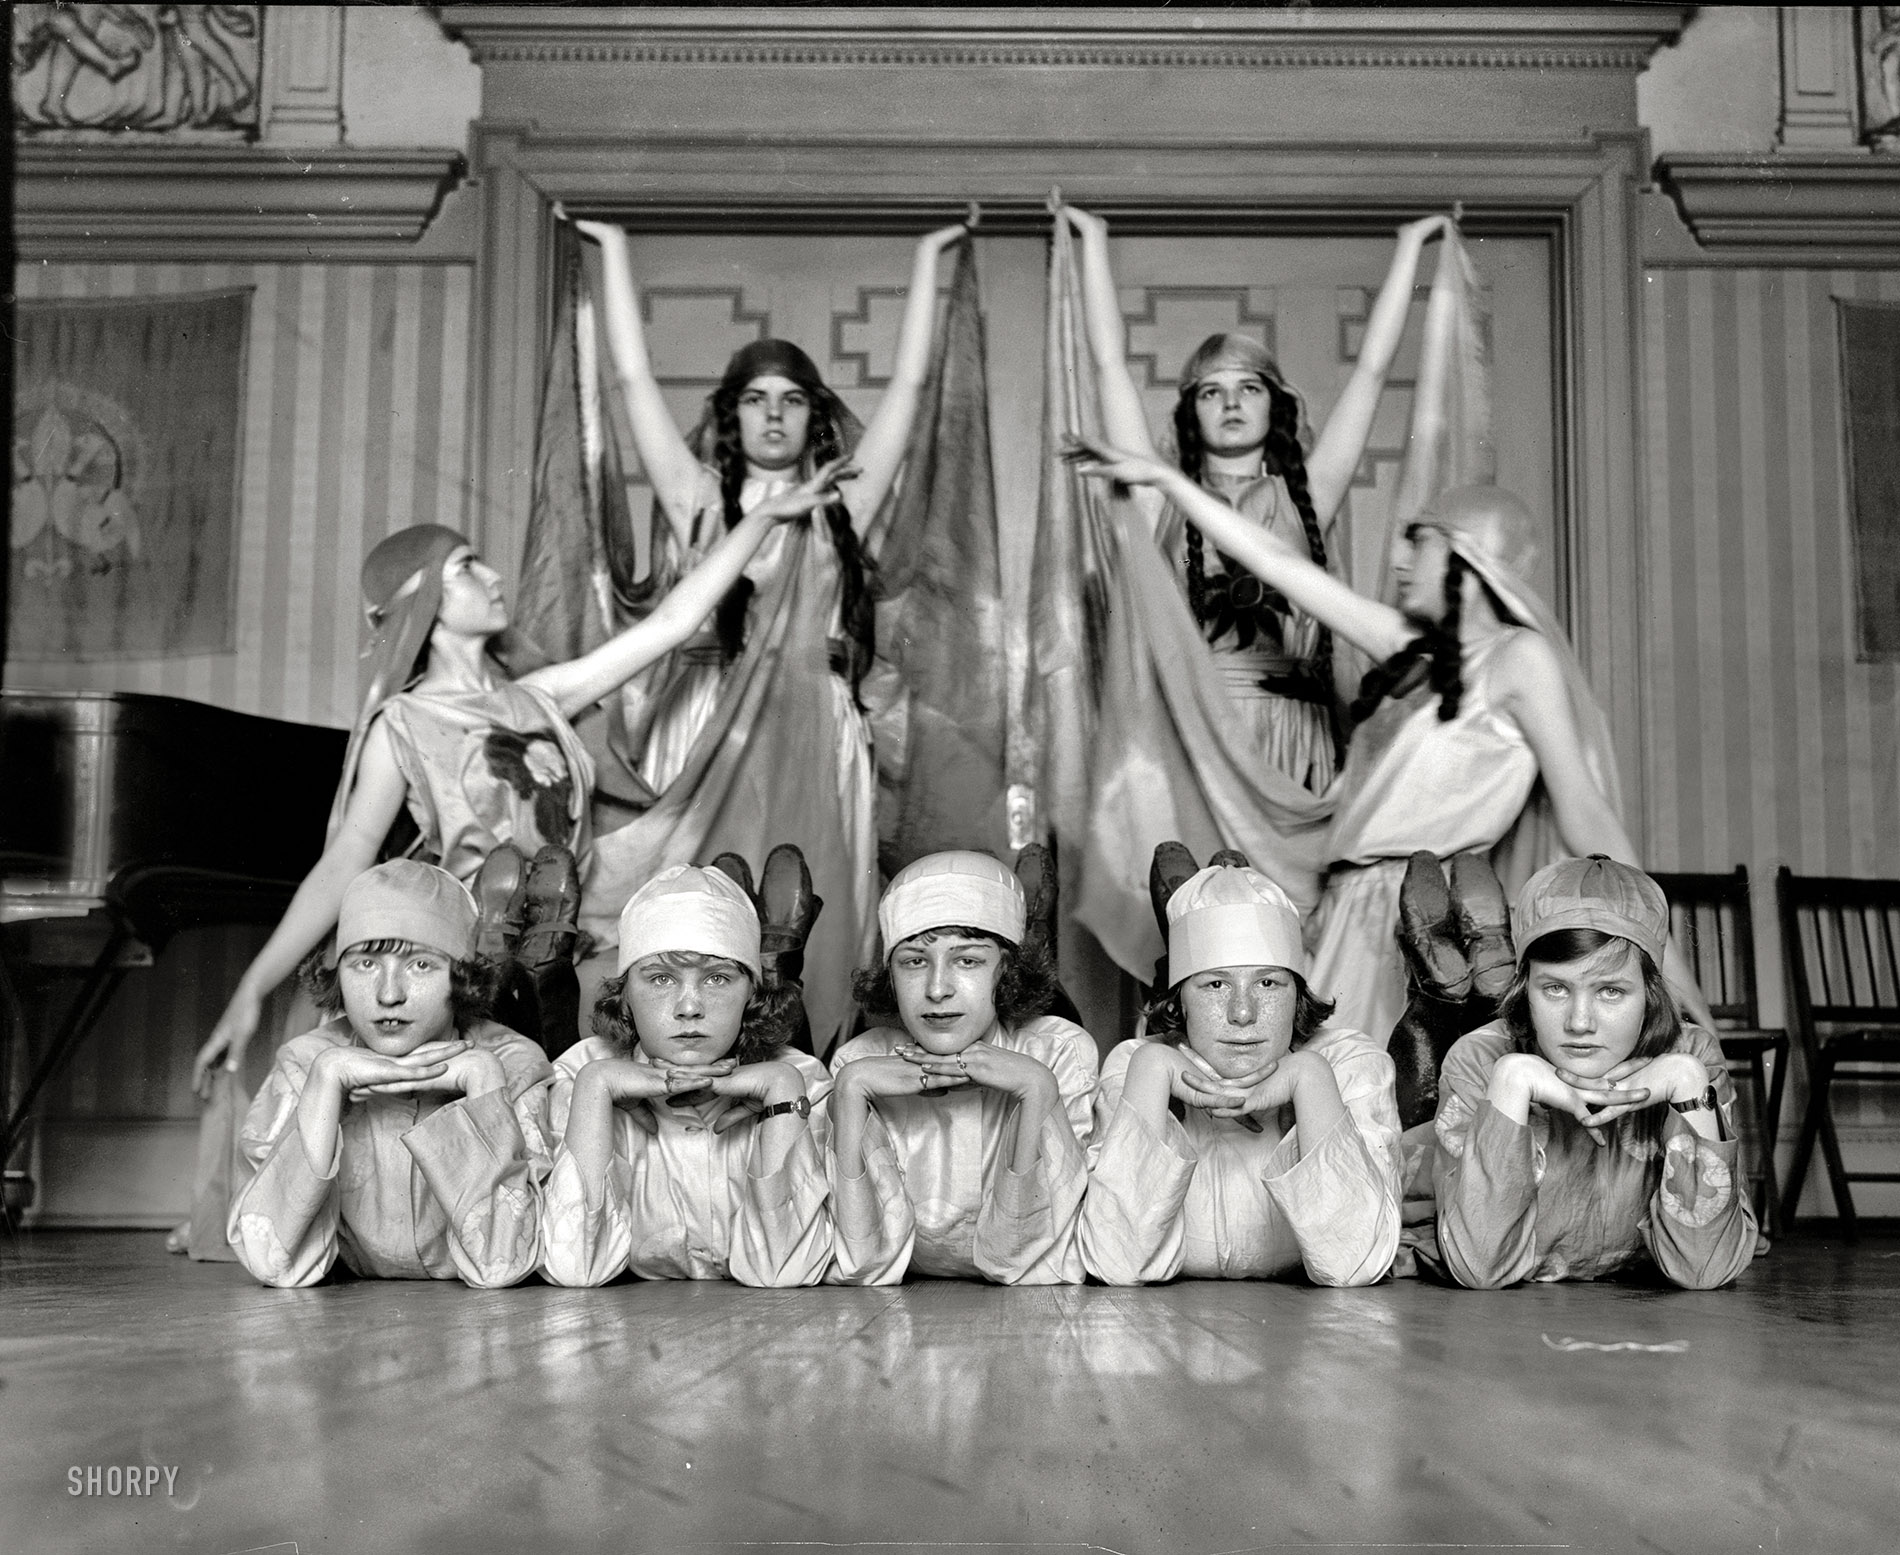 April 9, 1923. Washington, D.C. "Paul Tchernikoff dancers, Russian Village Fair at Wardman Park Inn." Our second glimpse of these lithe young ladies. National Photo Company Collection glass negative. View full size.